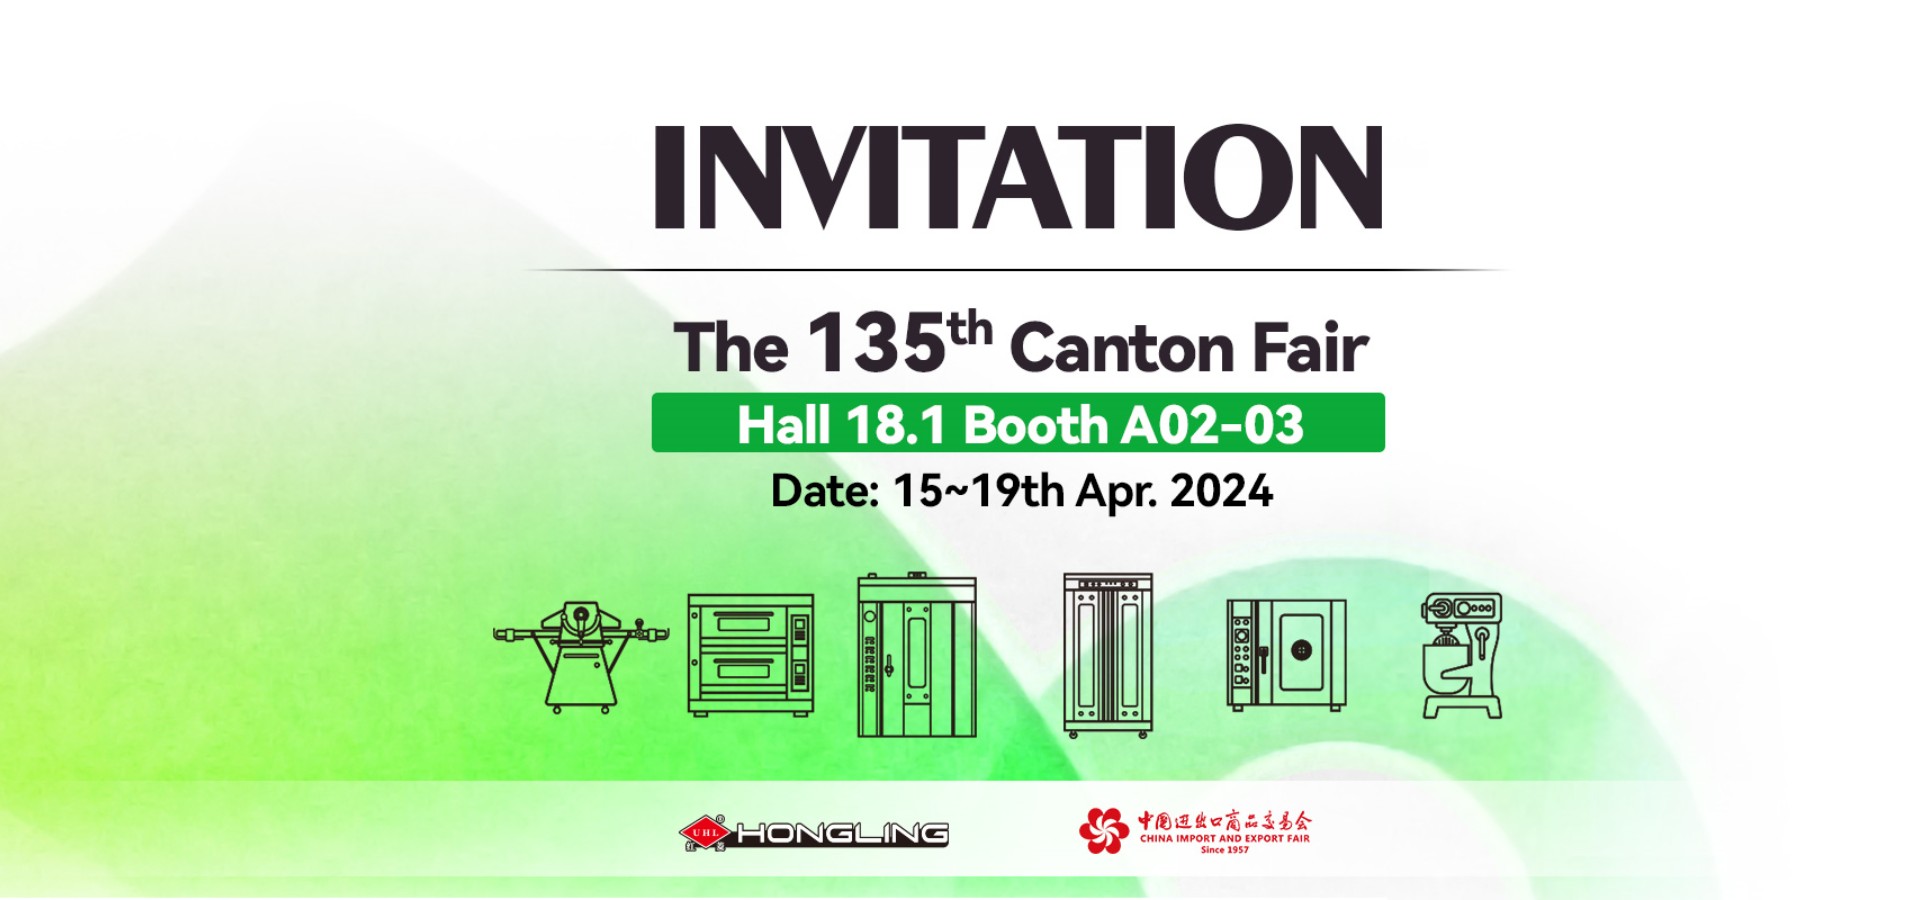 Welcome to the 135th Canton Fair from April 15th to 19th